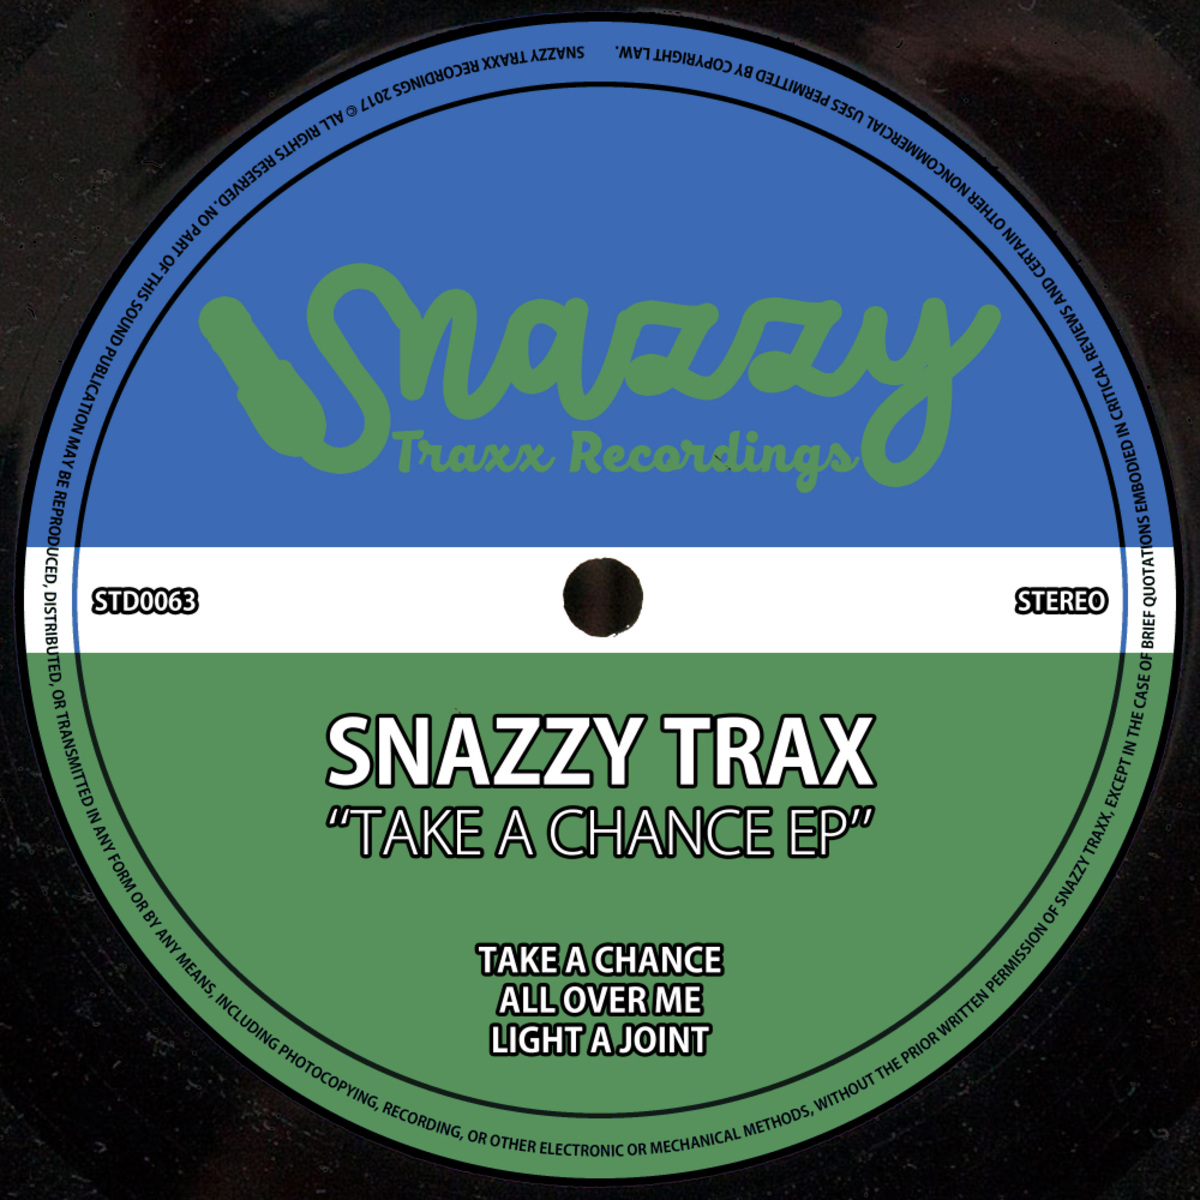 Snazzy Trax - Take A Chance EP / Snazzy Traxx